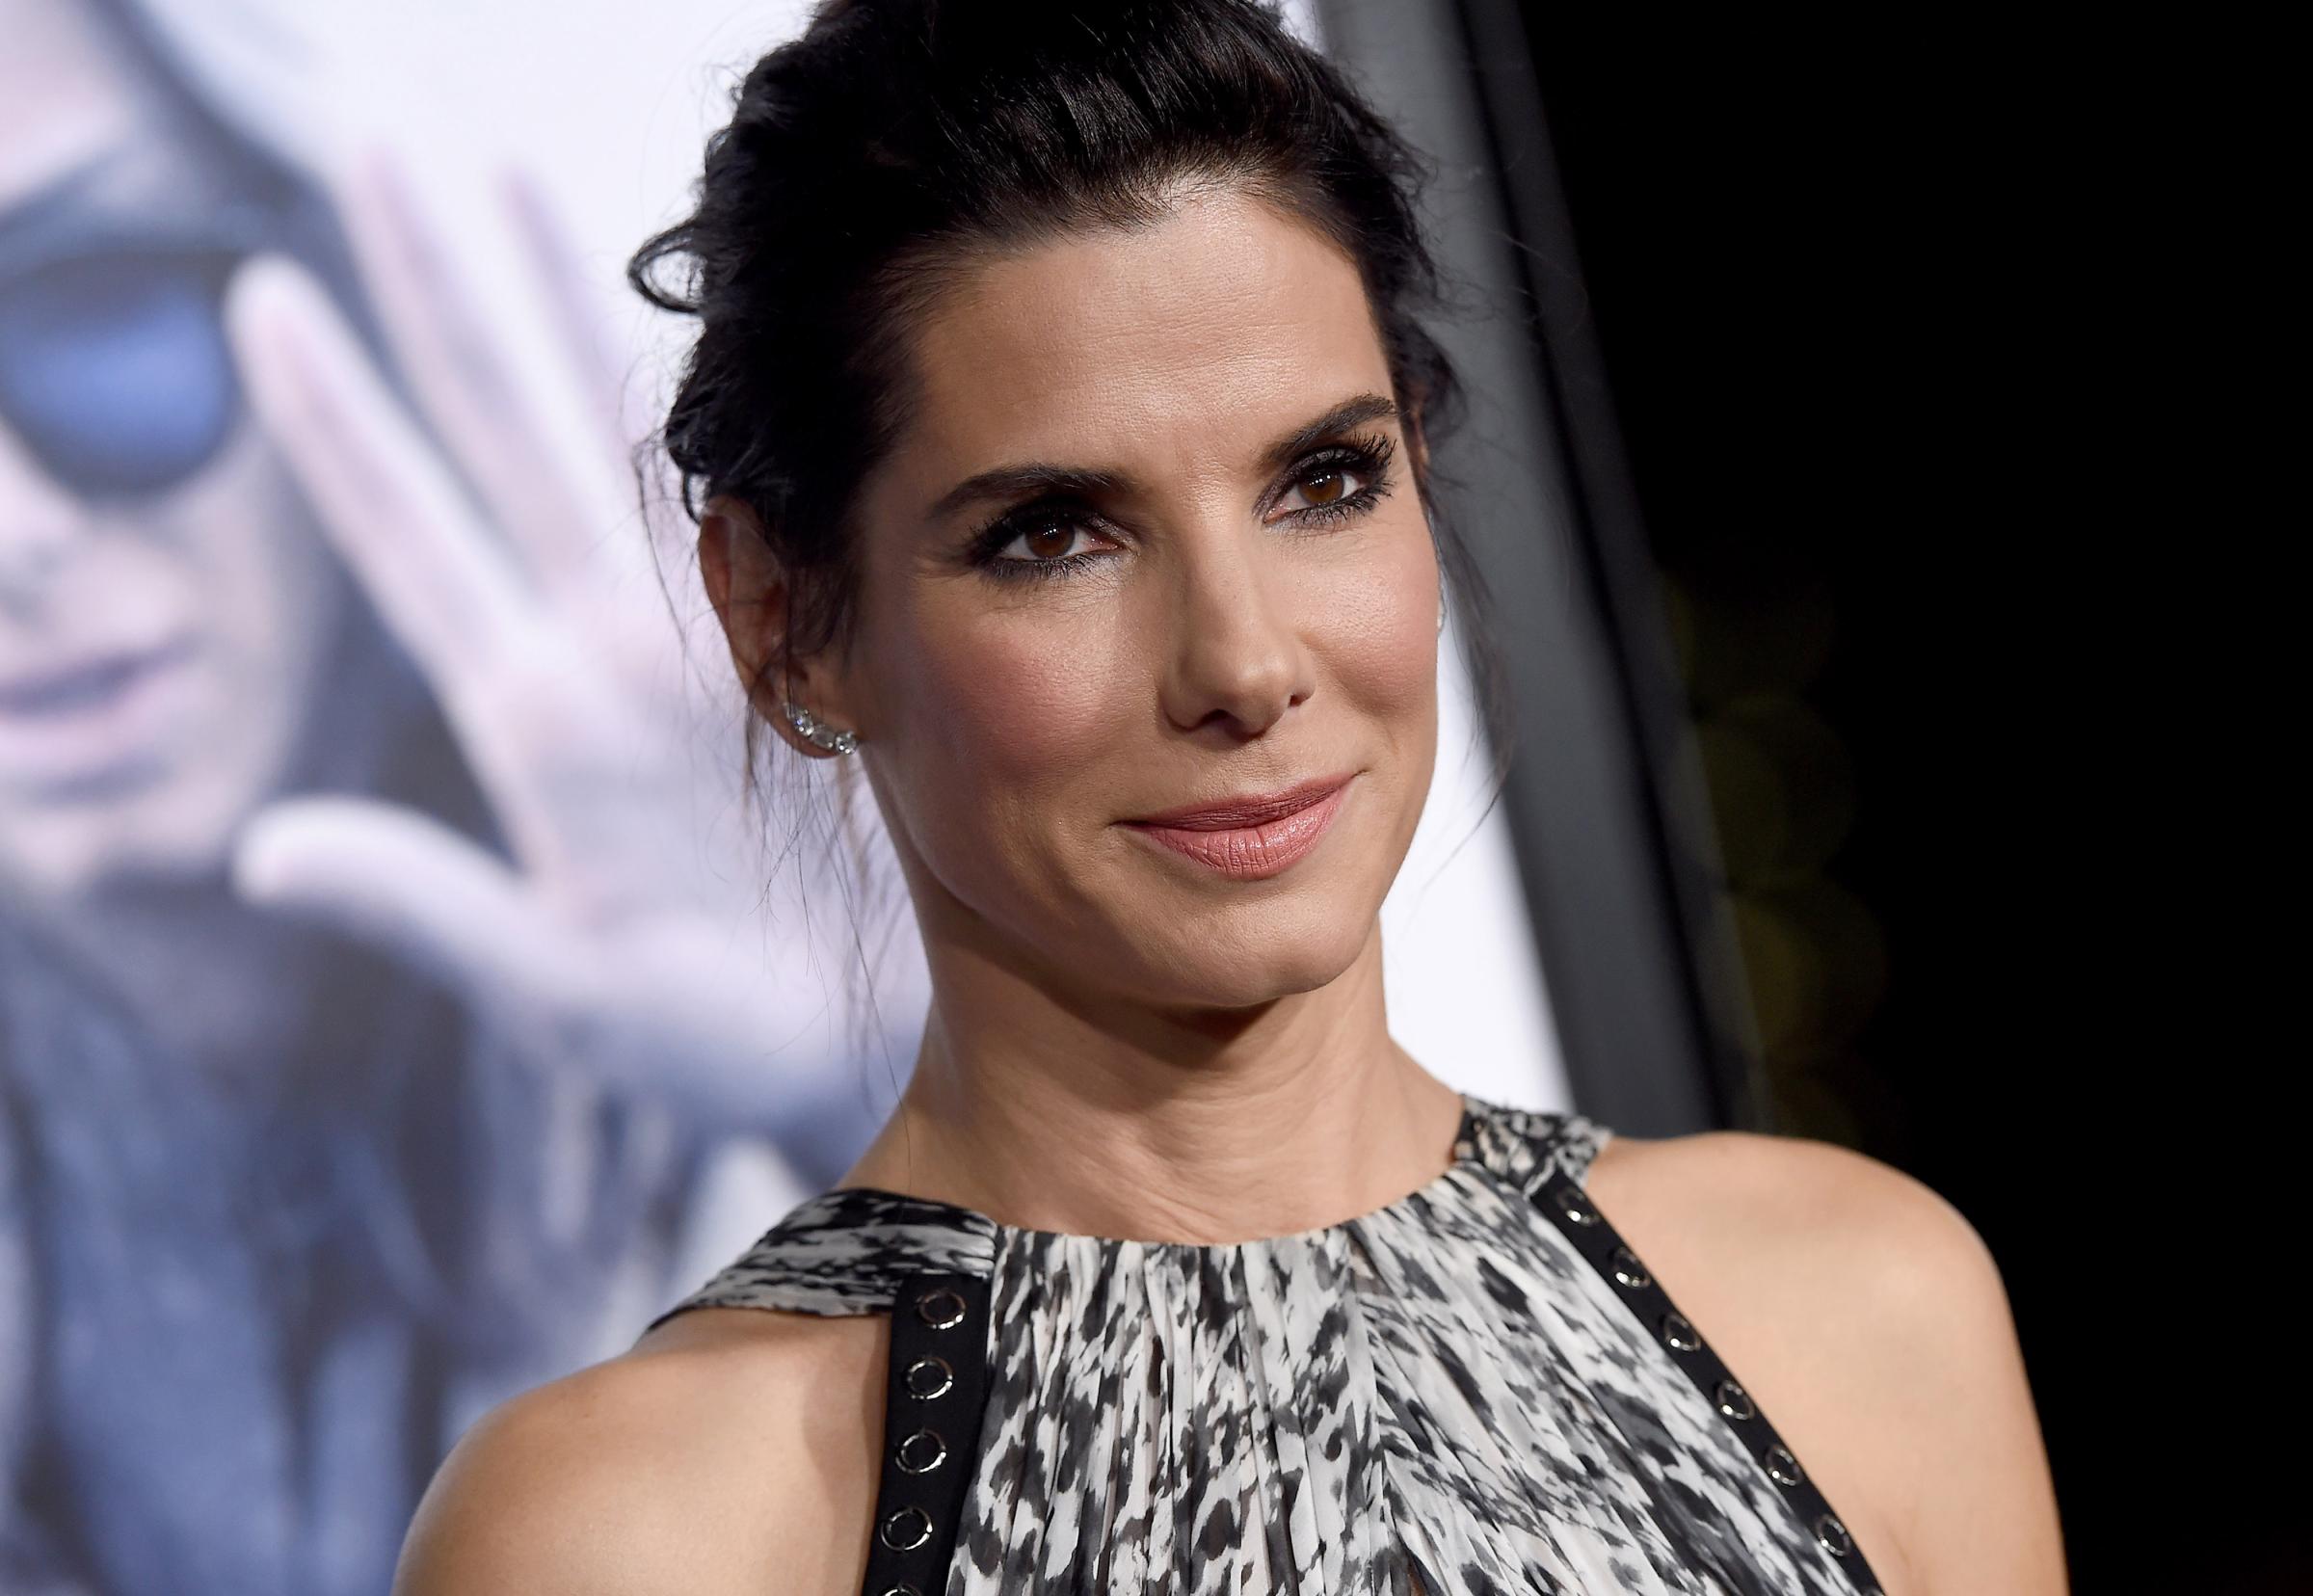 Actress Sandra Bullock arrives at the premiere of Warner Bros. Pictures' 'Our Brand Is Crisis' at TCL Chinese Theatre on October 26, 2015 in Hollywood, California.